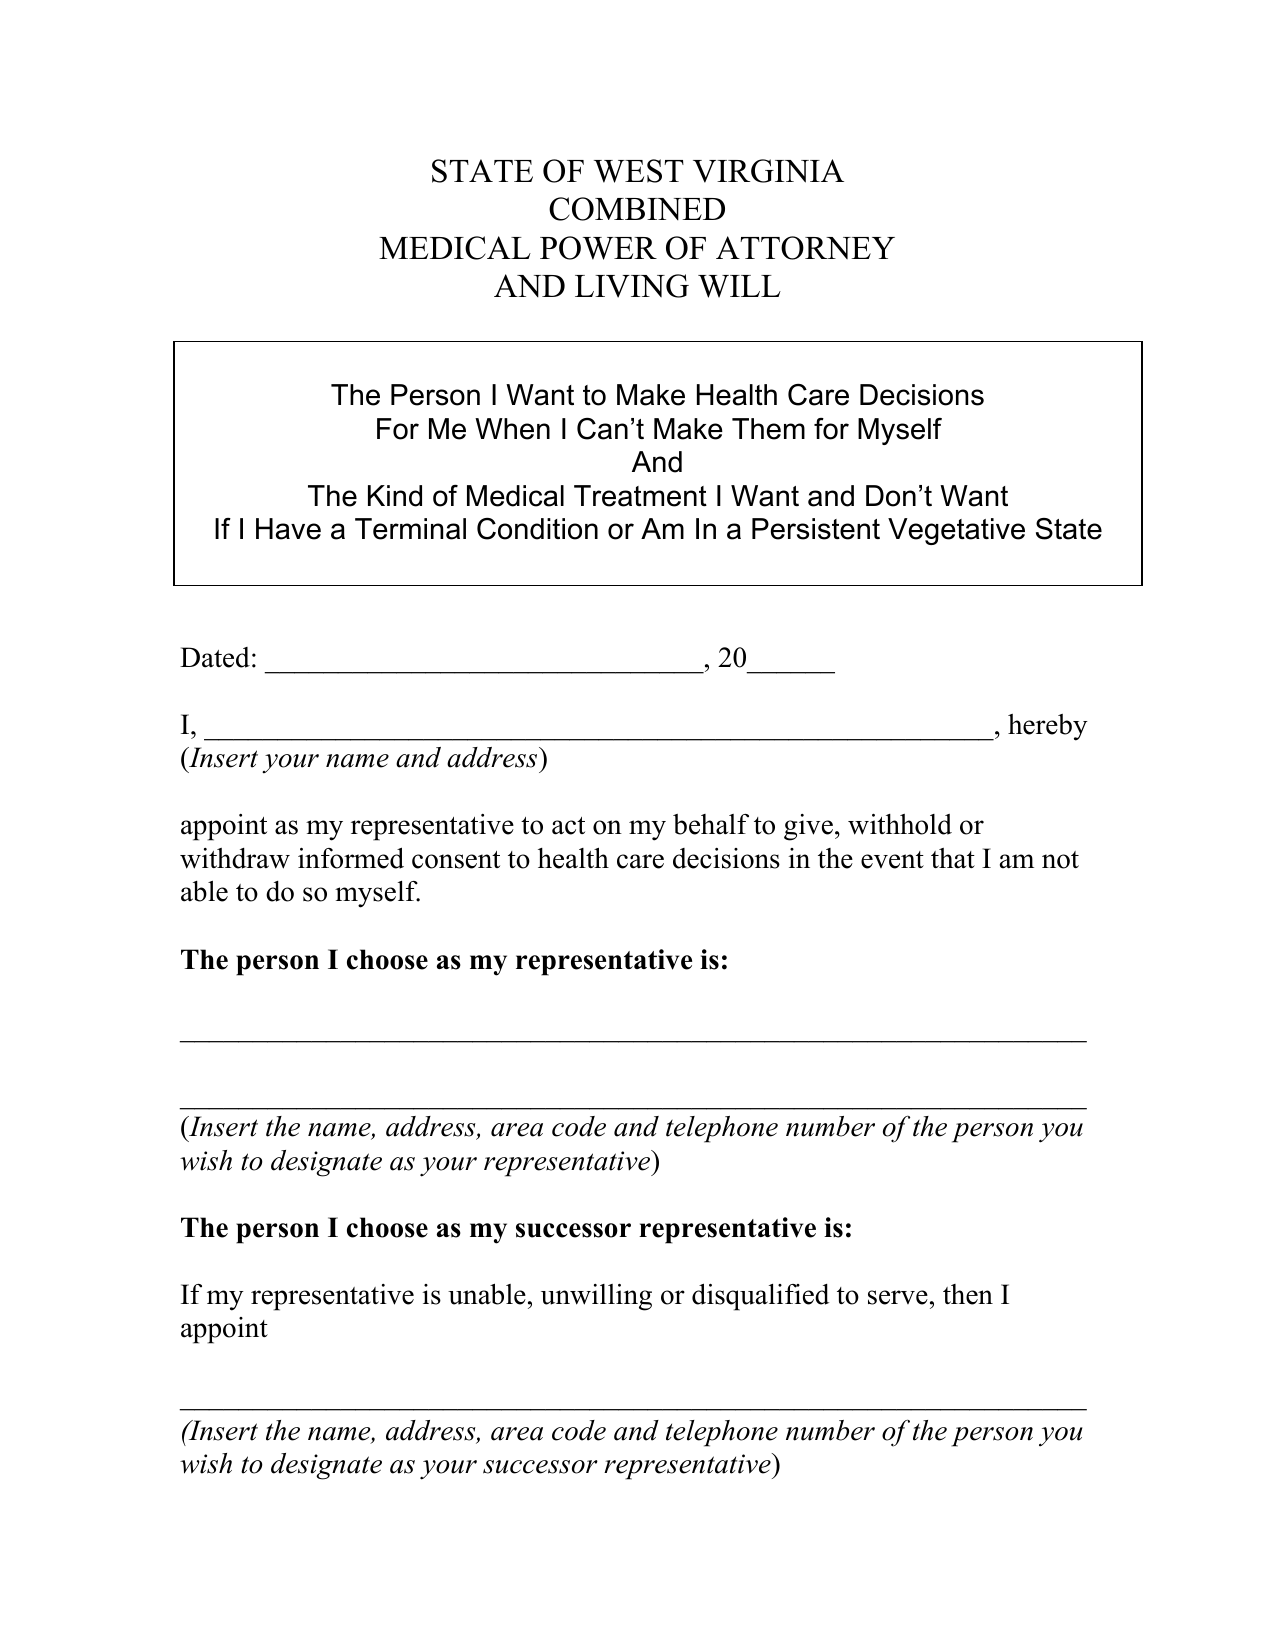 download-west-virginia-living-will-form-advance-directive-pdf